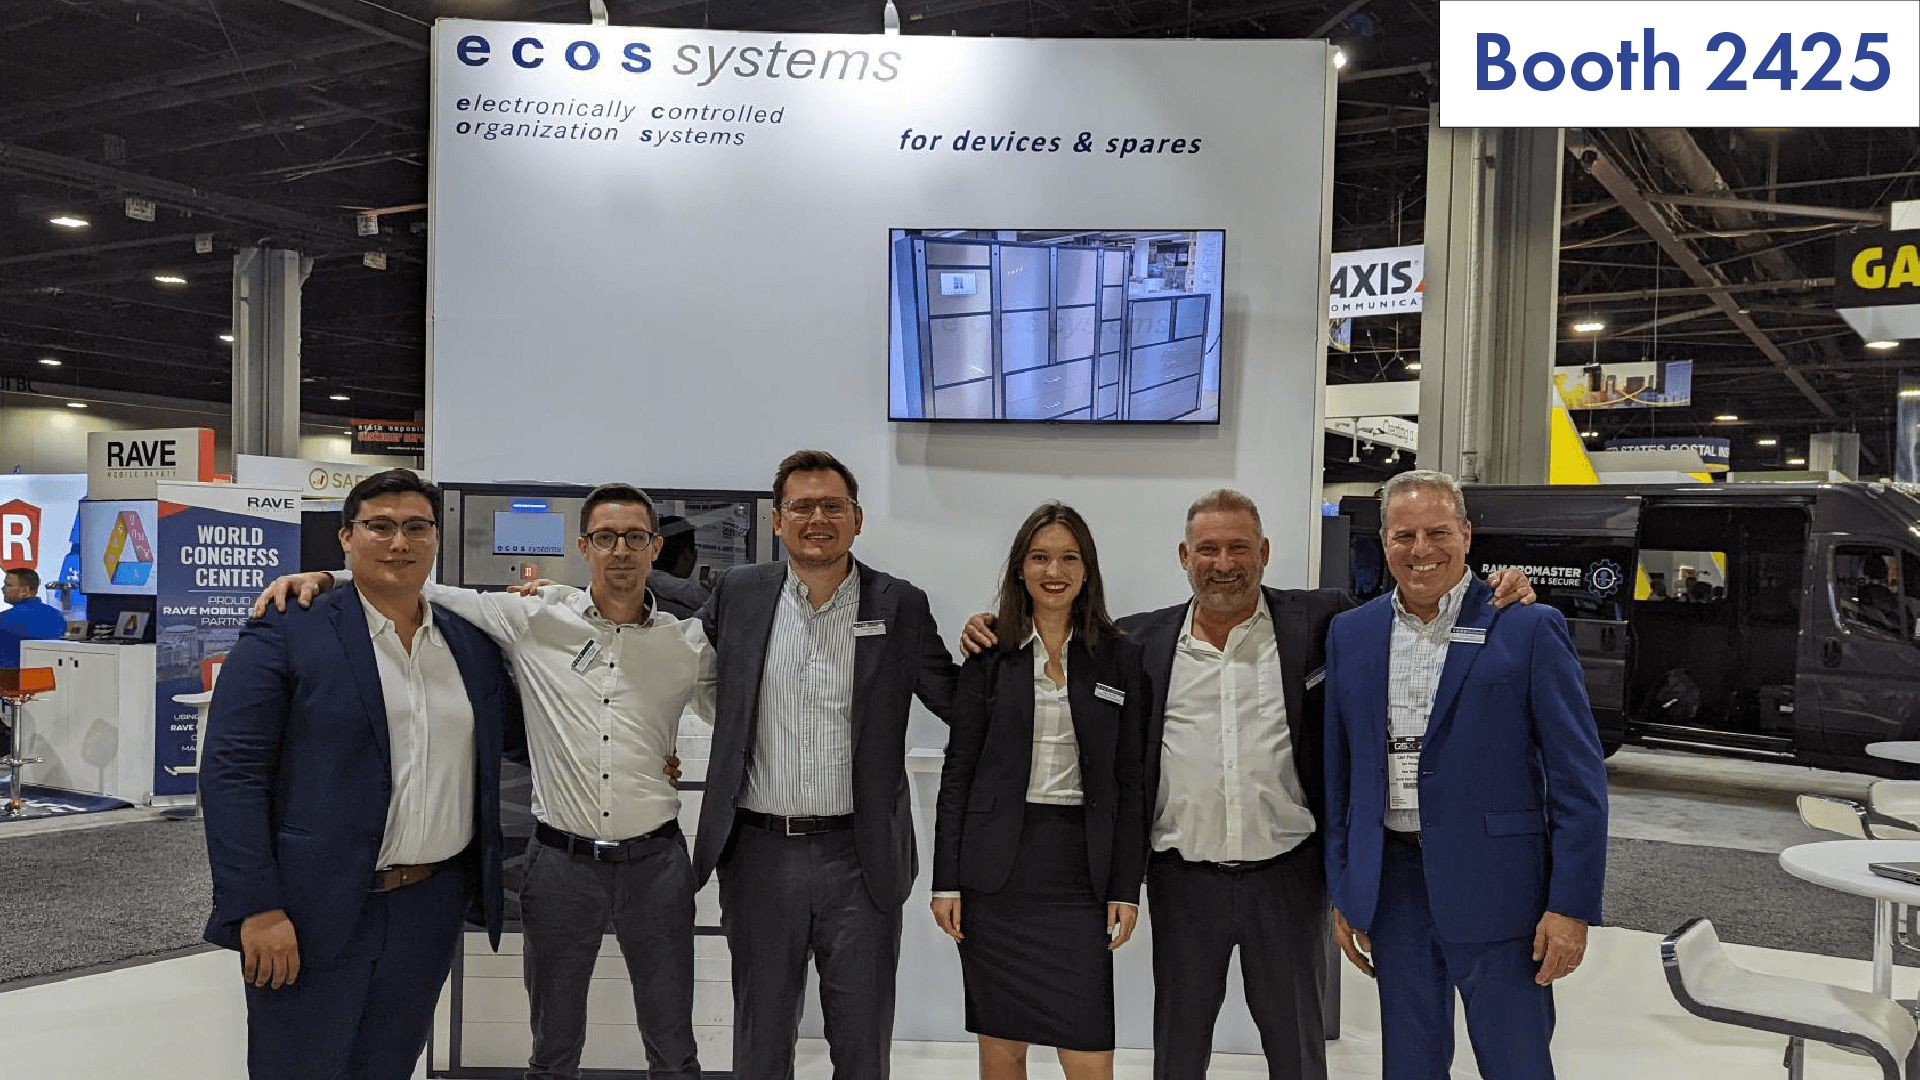 GSX Global Security Exchange visit by ecos systems Team